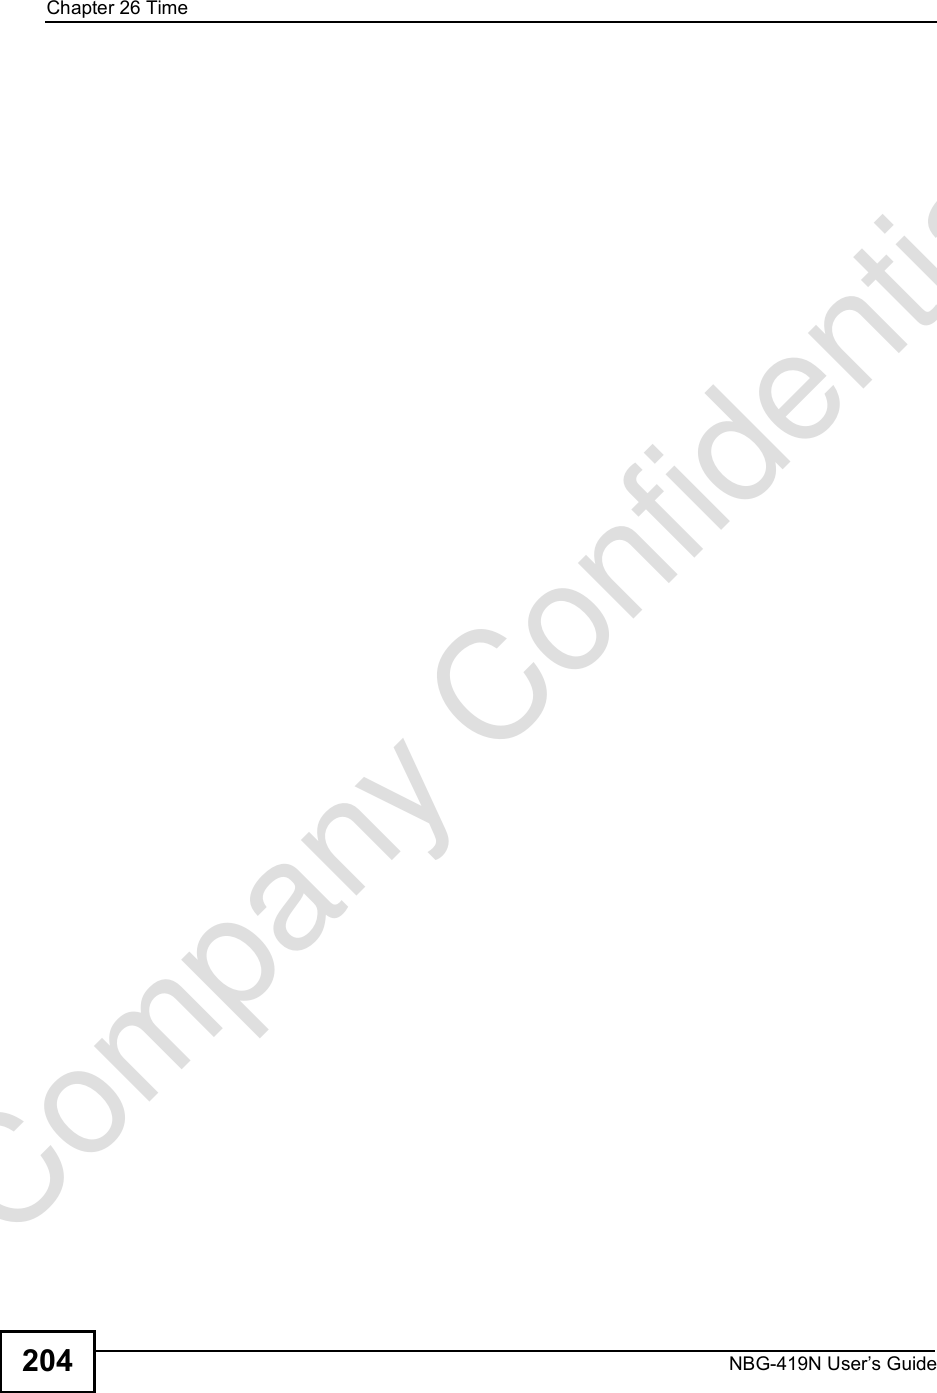 Chapter 26TimeNBG-419N User s Guide204Company Confidential